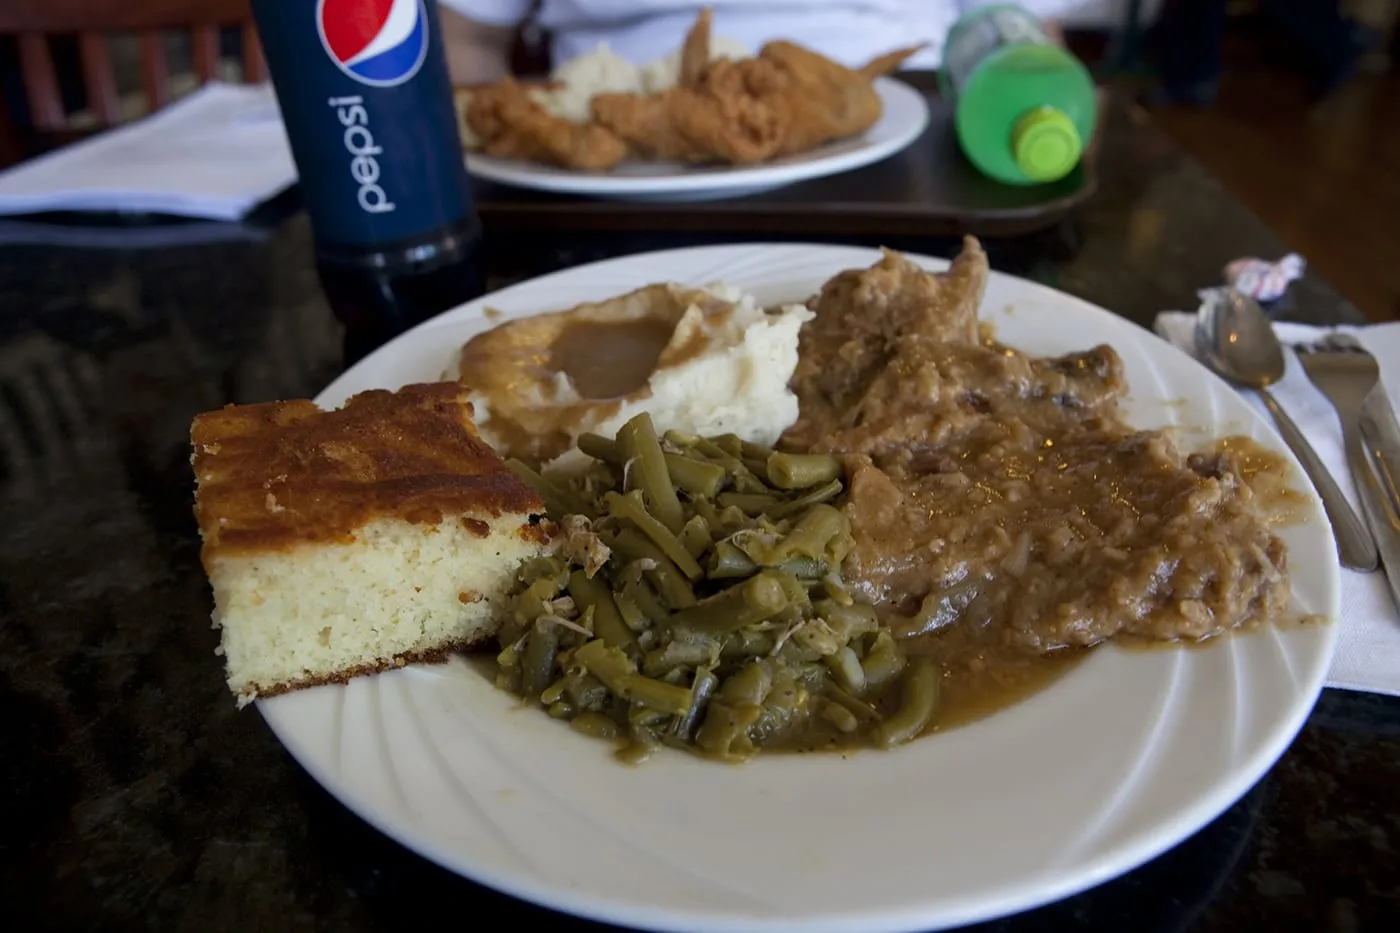 Smothered pork and mashed potatoes at Sweetie Pie's in St. Louis, Missouri.